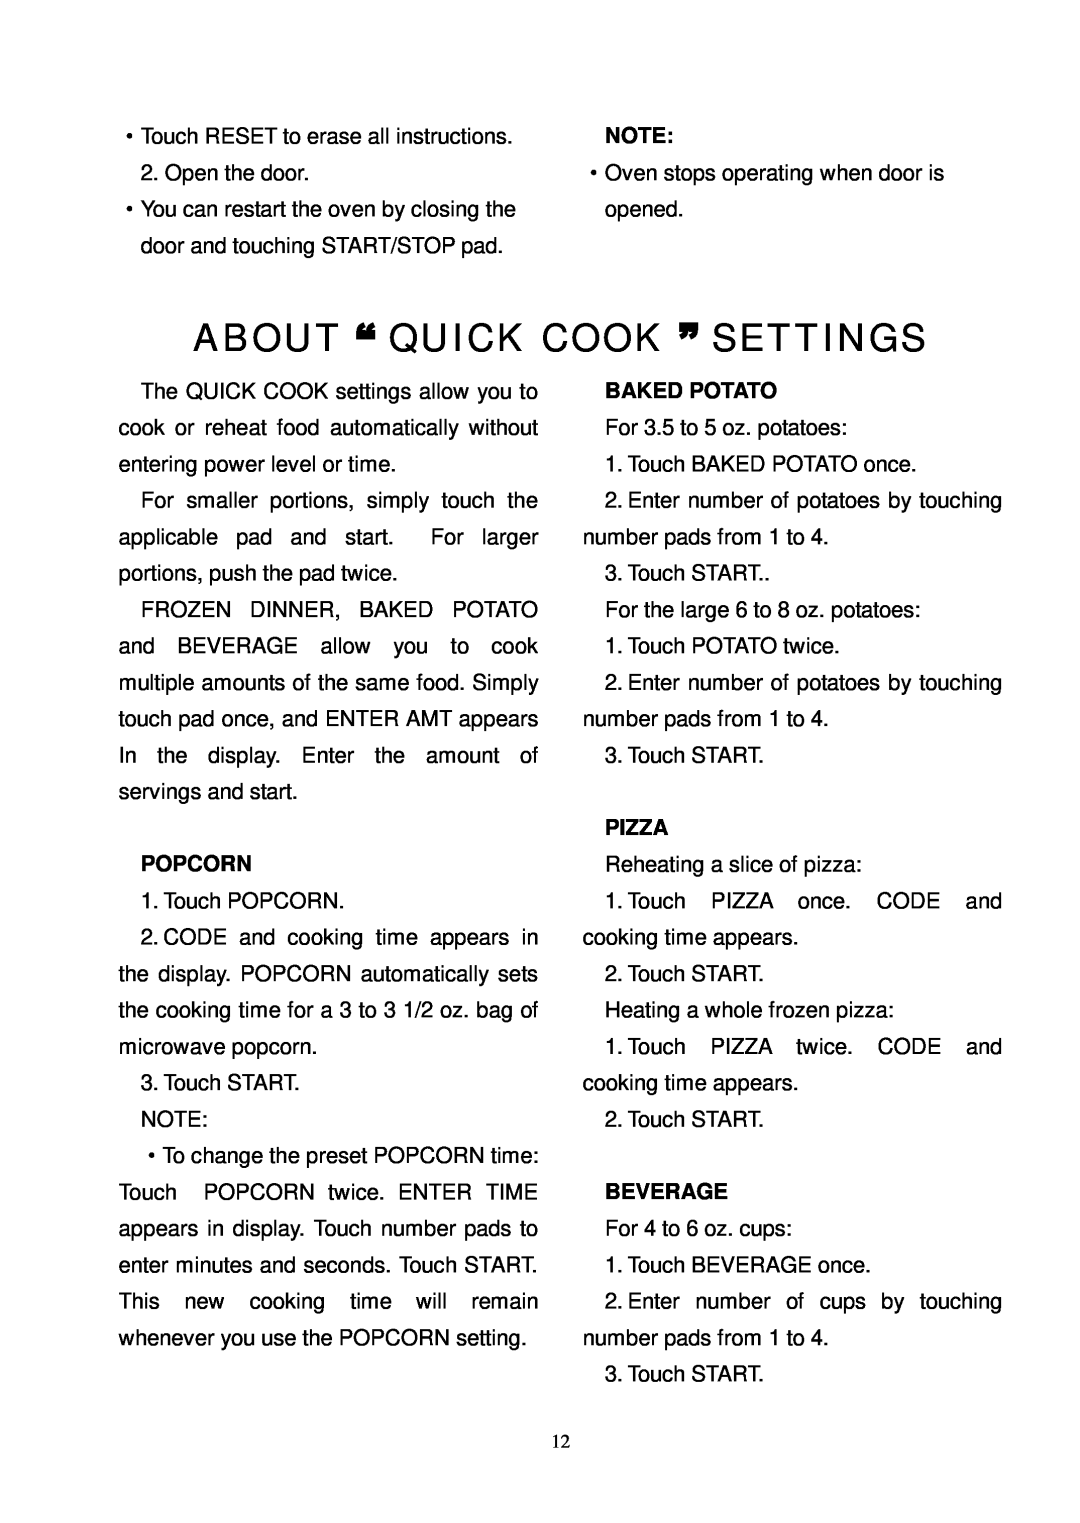 Kenmore 87000 user manual About “ Quick Cook ” Settings, Popcorn, Baked Potato, Pizza, Beverage 